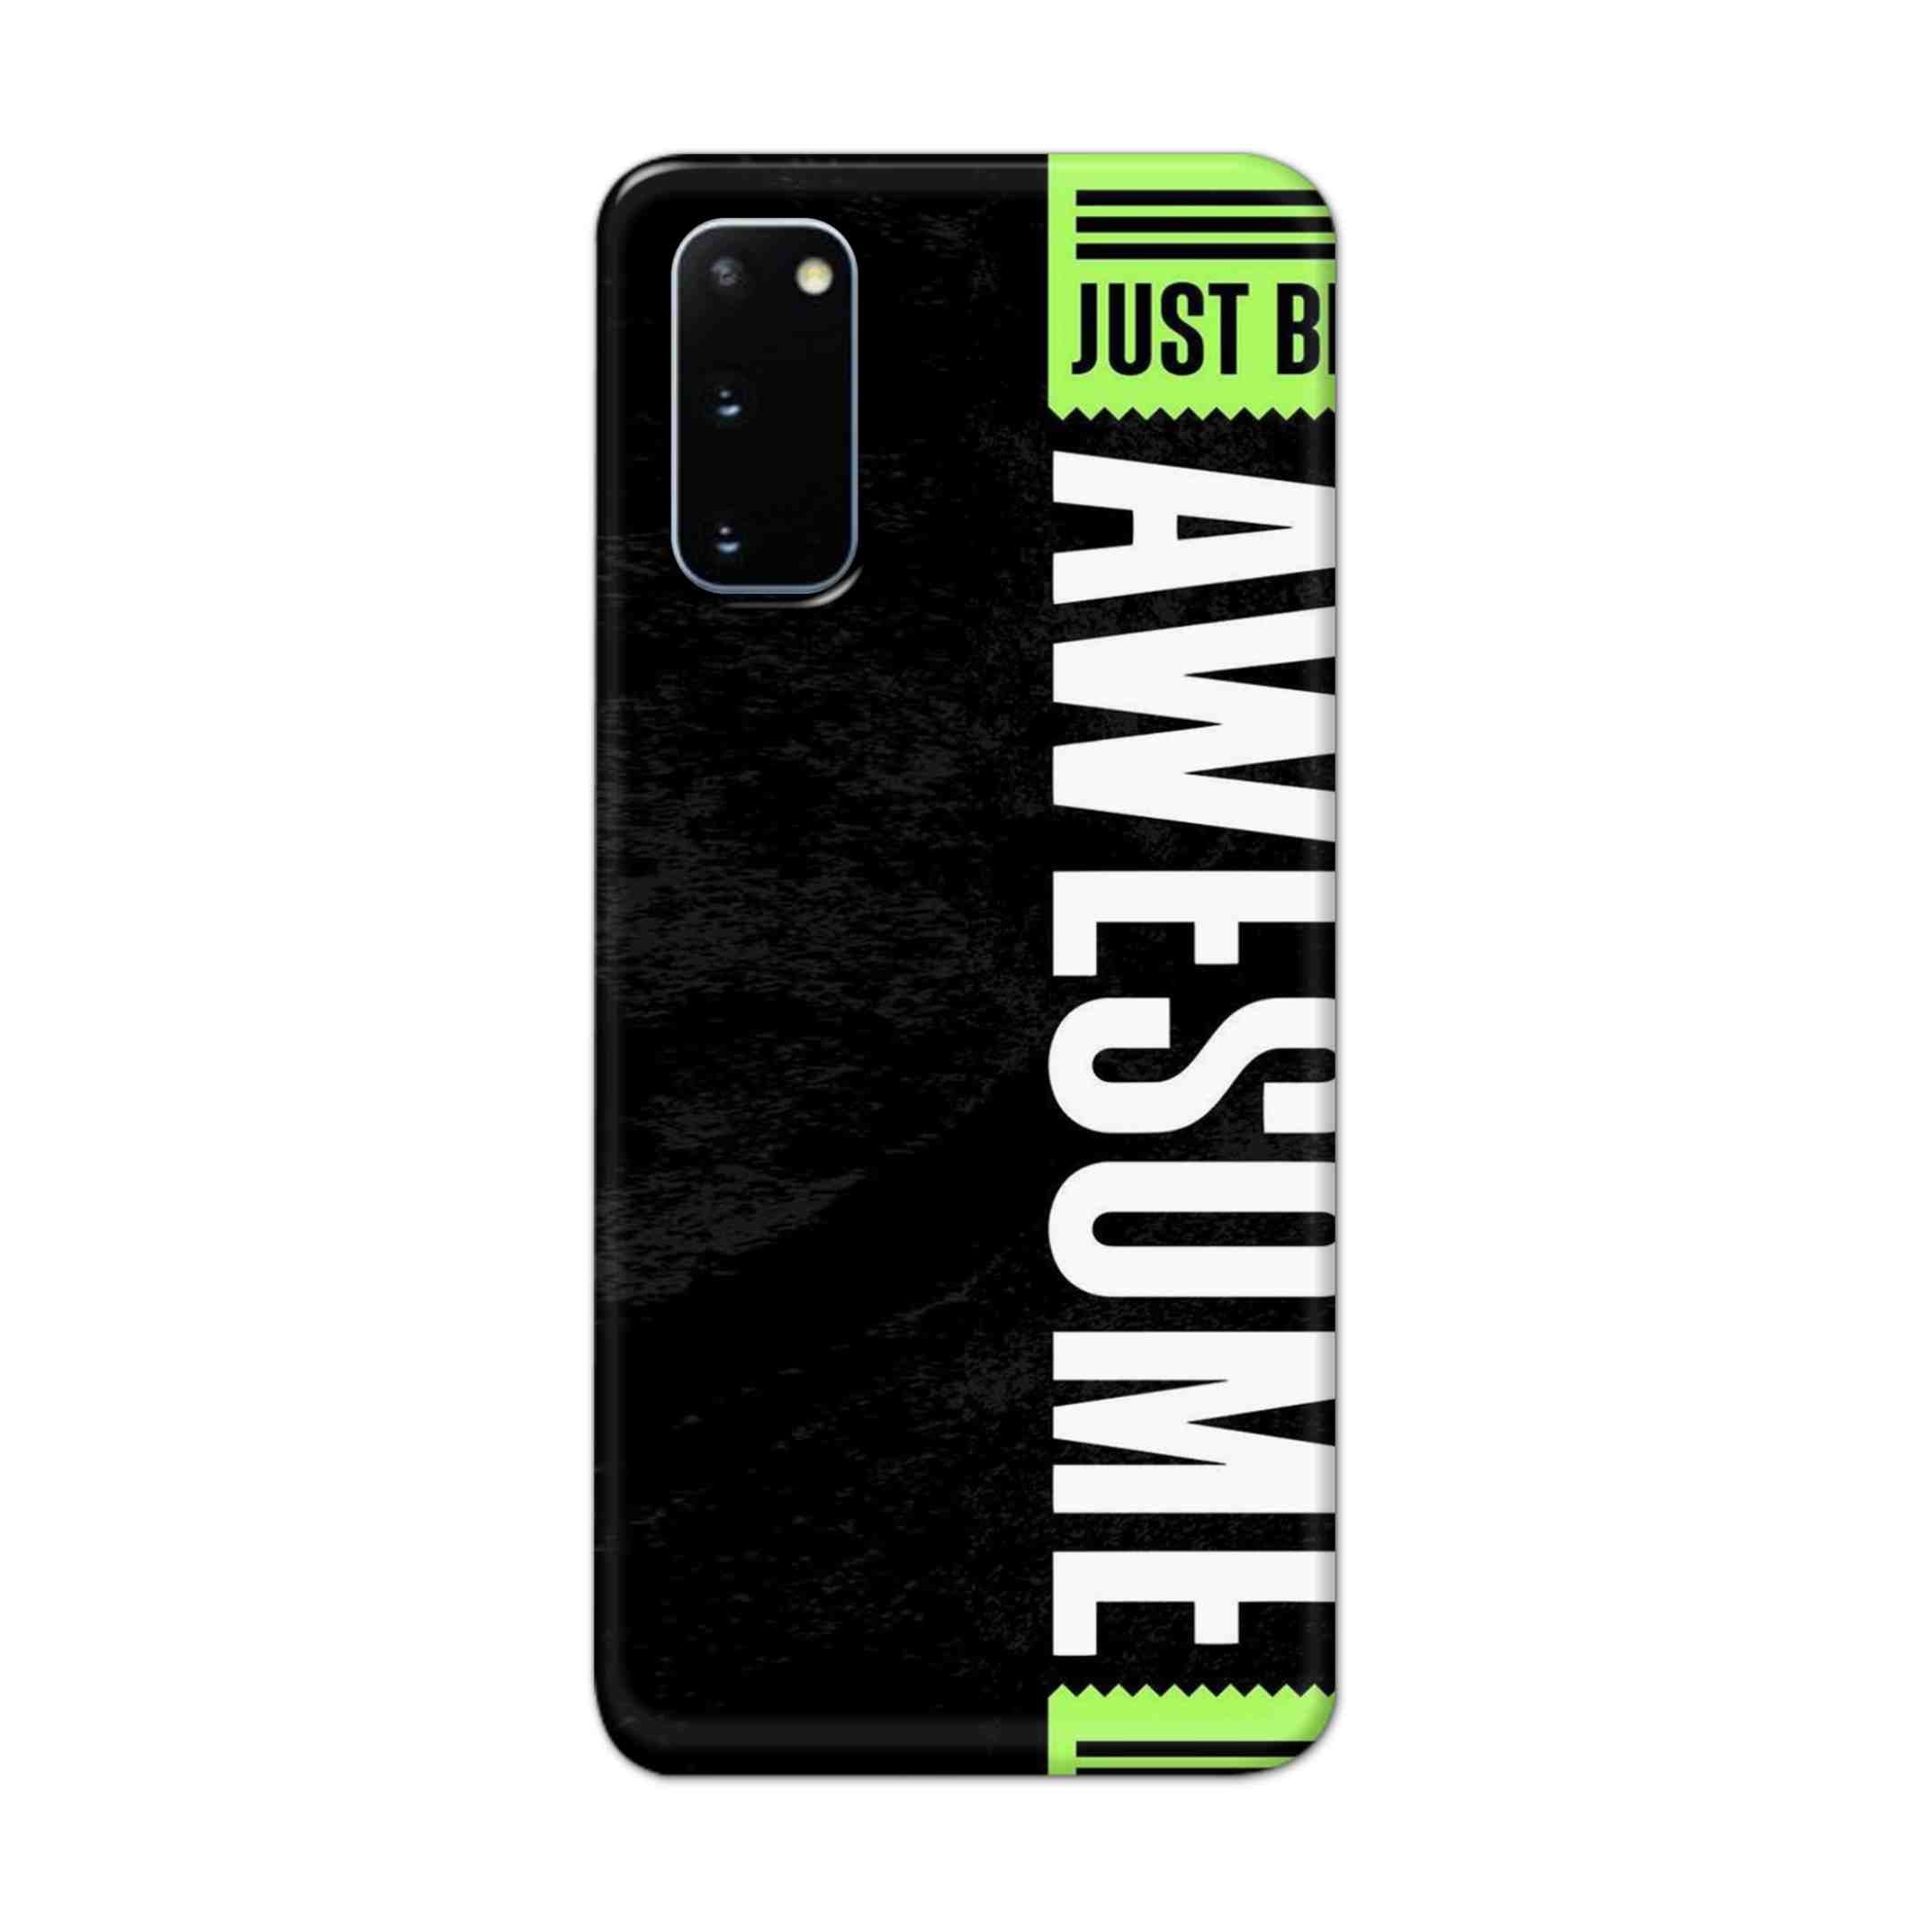 Buy Awesome Street Hard Back Mobile Phone Case Cover For Samsung Galaxy S20 Online